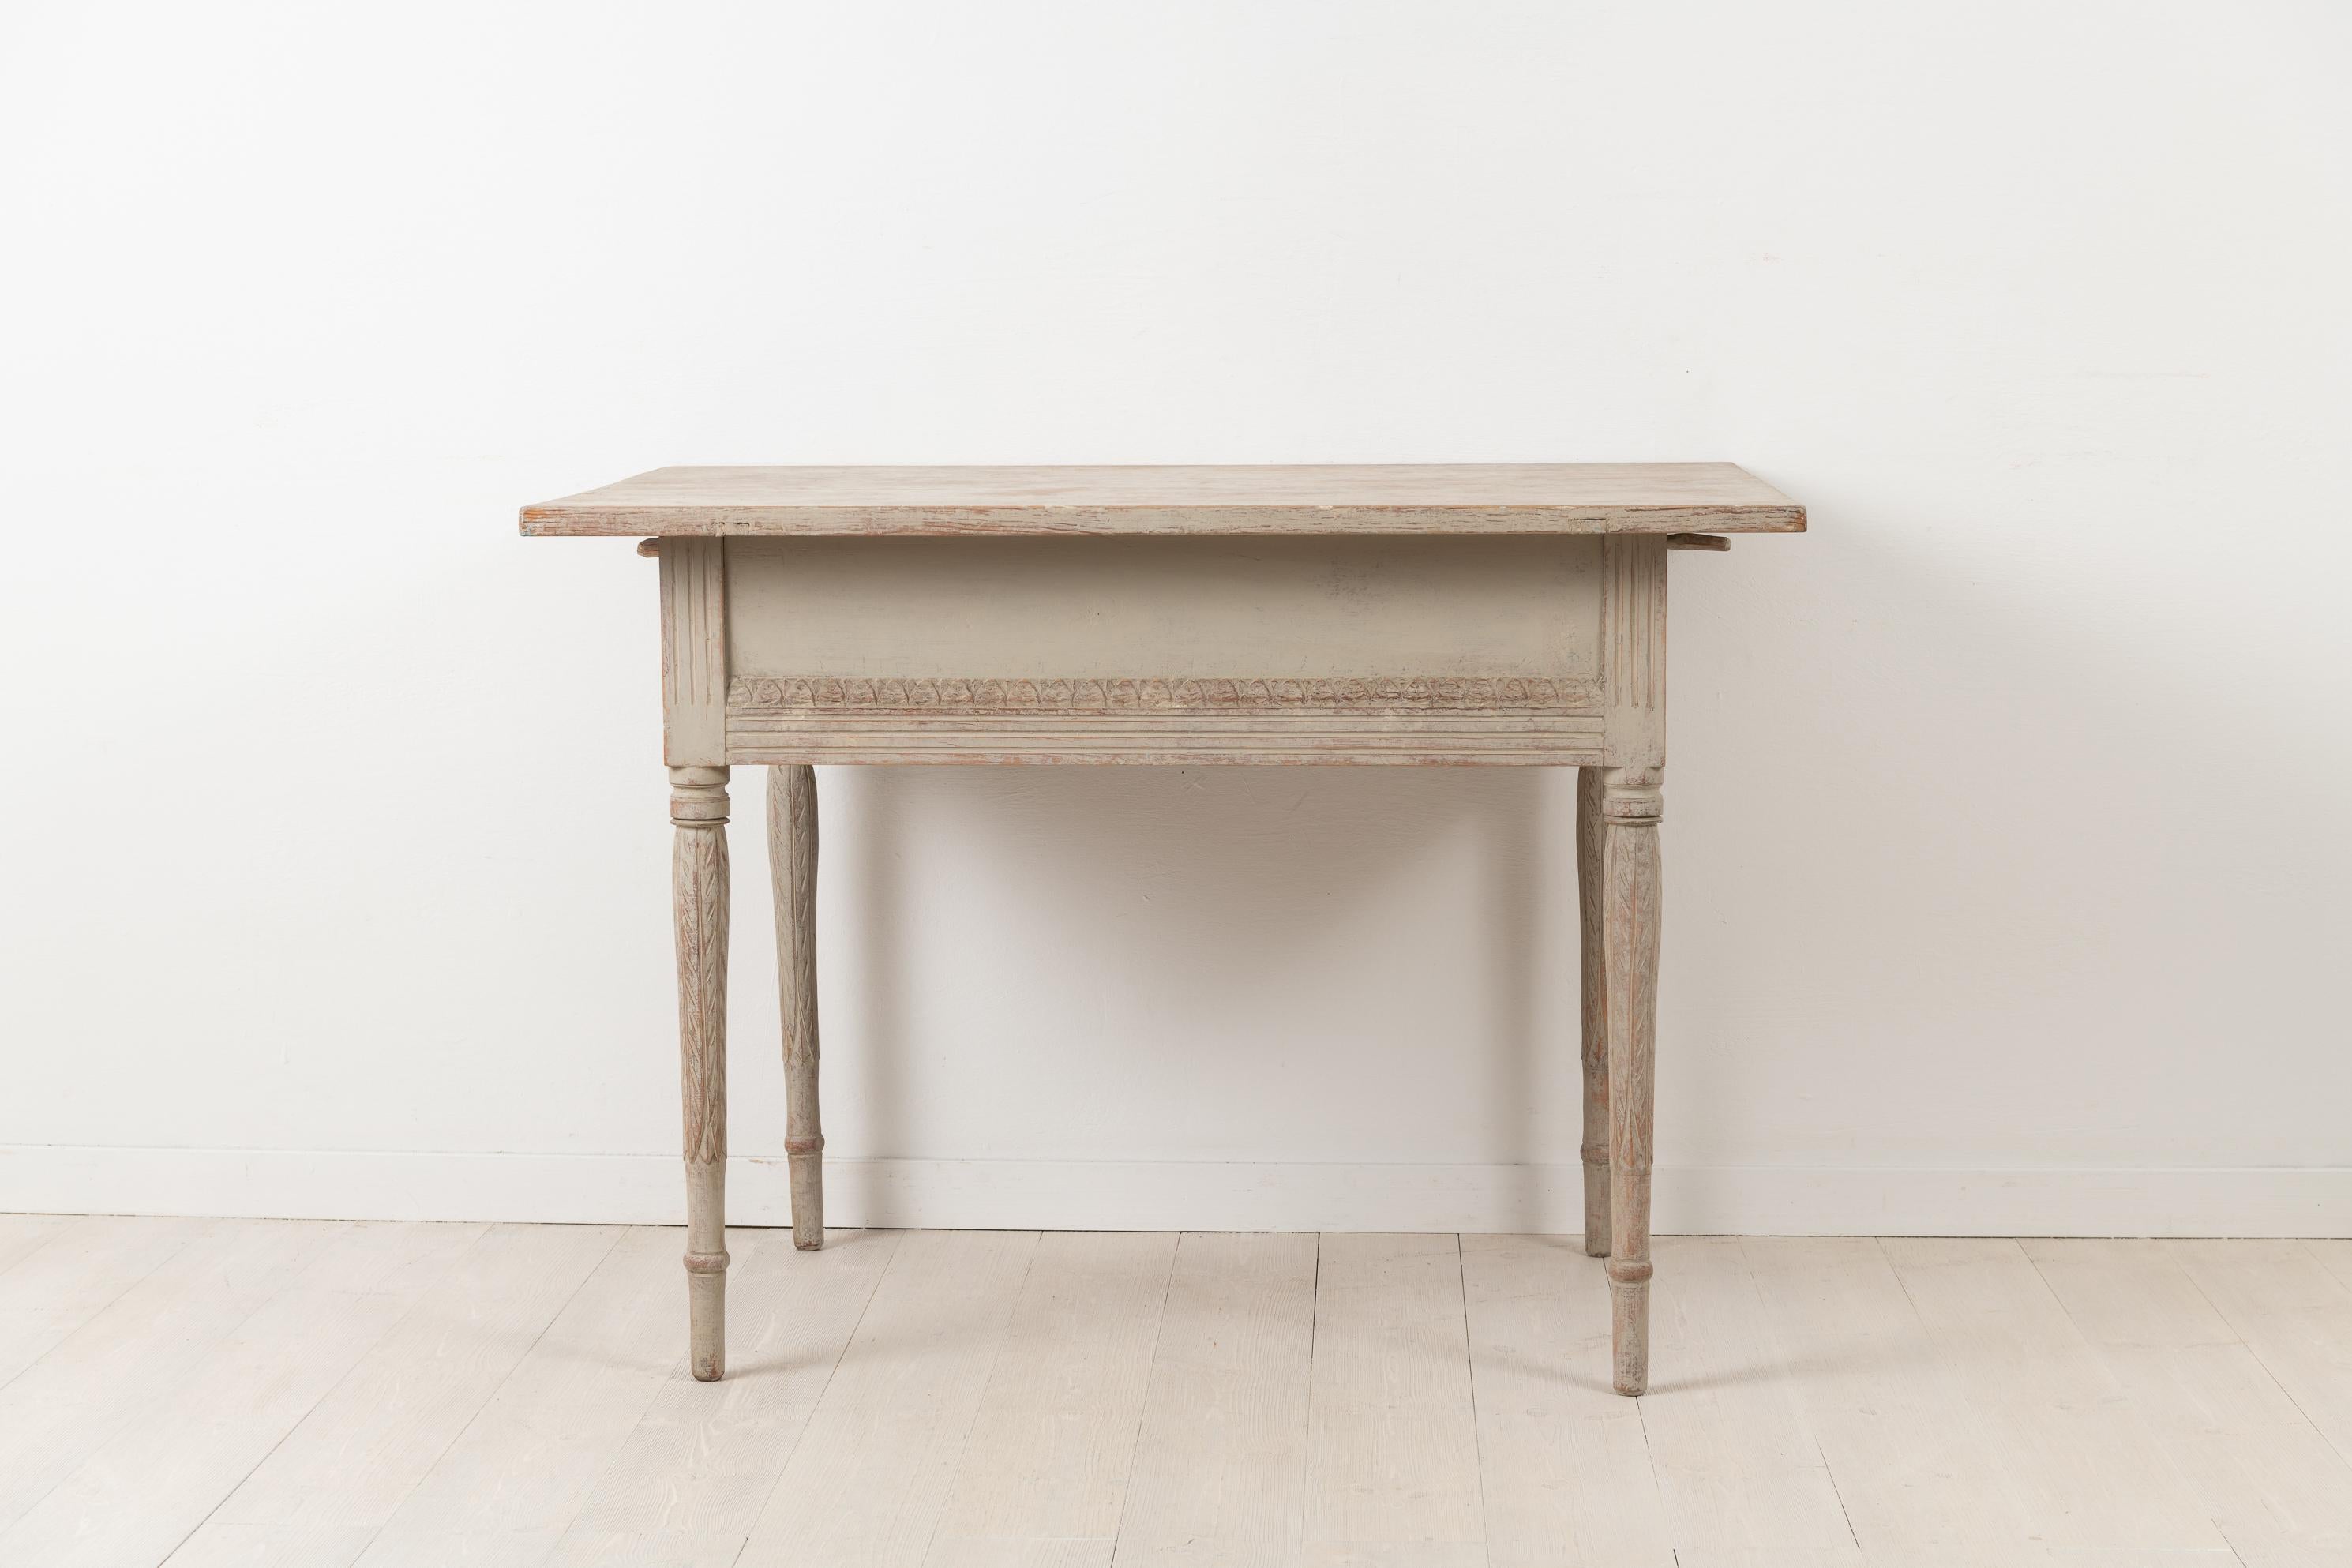 Provincial neoclassical console table. The table is from northern Sweden, more specifically a village called Forsa, and made between 1790 and 1800. The console table or wall table as it also can be used is made from painted pine and decorated on